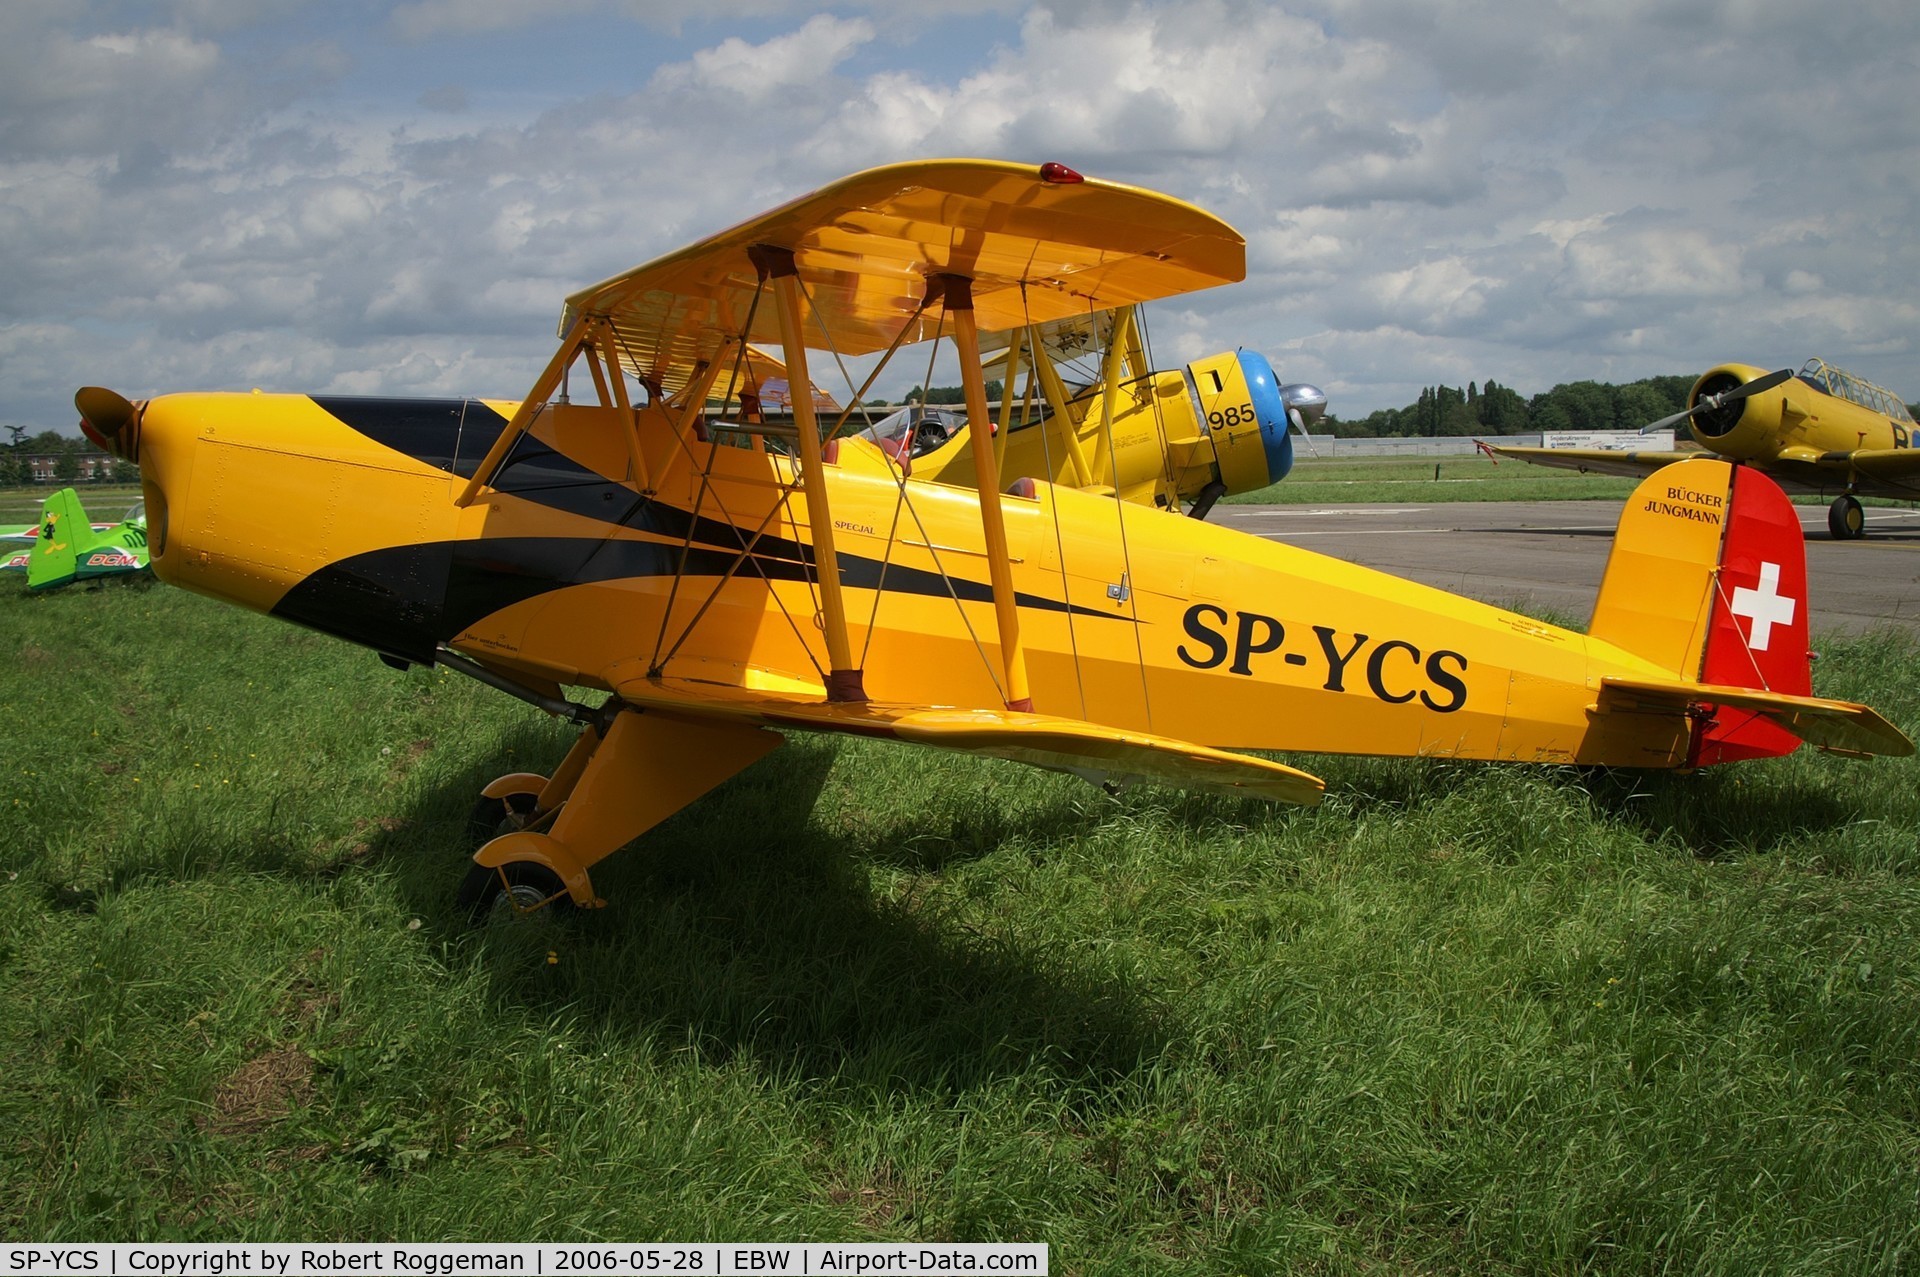 SP-YCS, Tatra T-131PA Jungmann C/N Not found SP-YCS, STAMPE FLY IN.